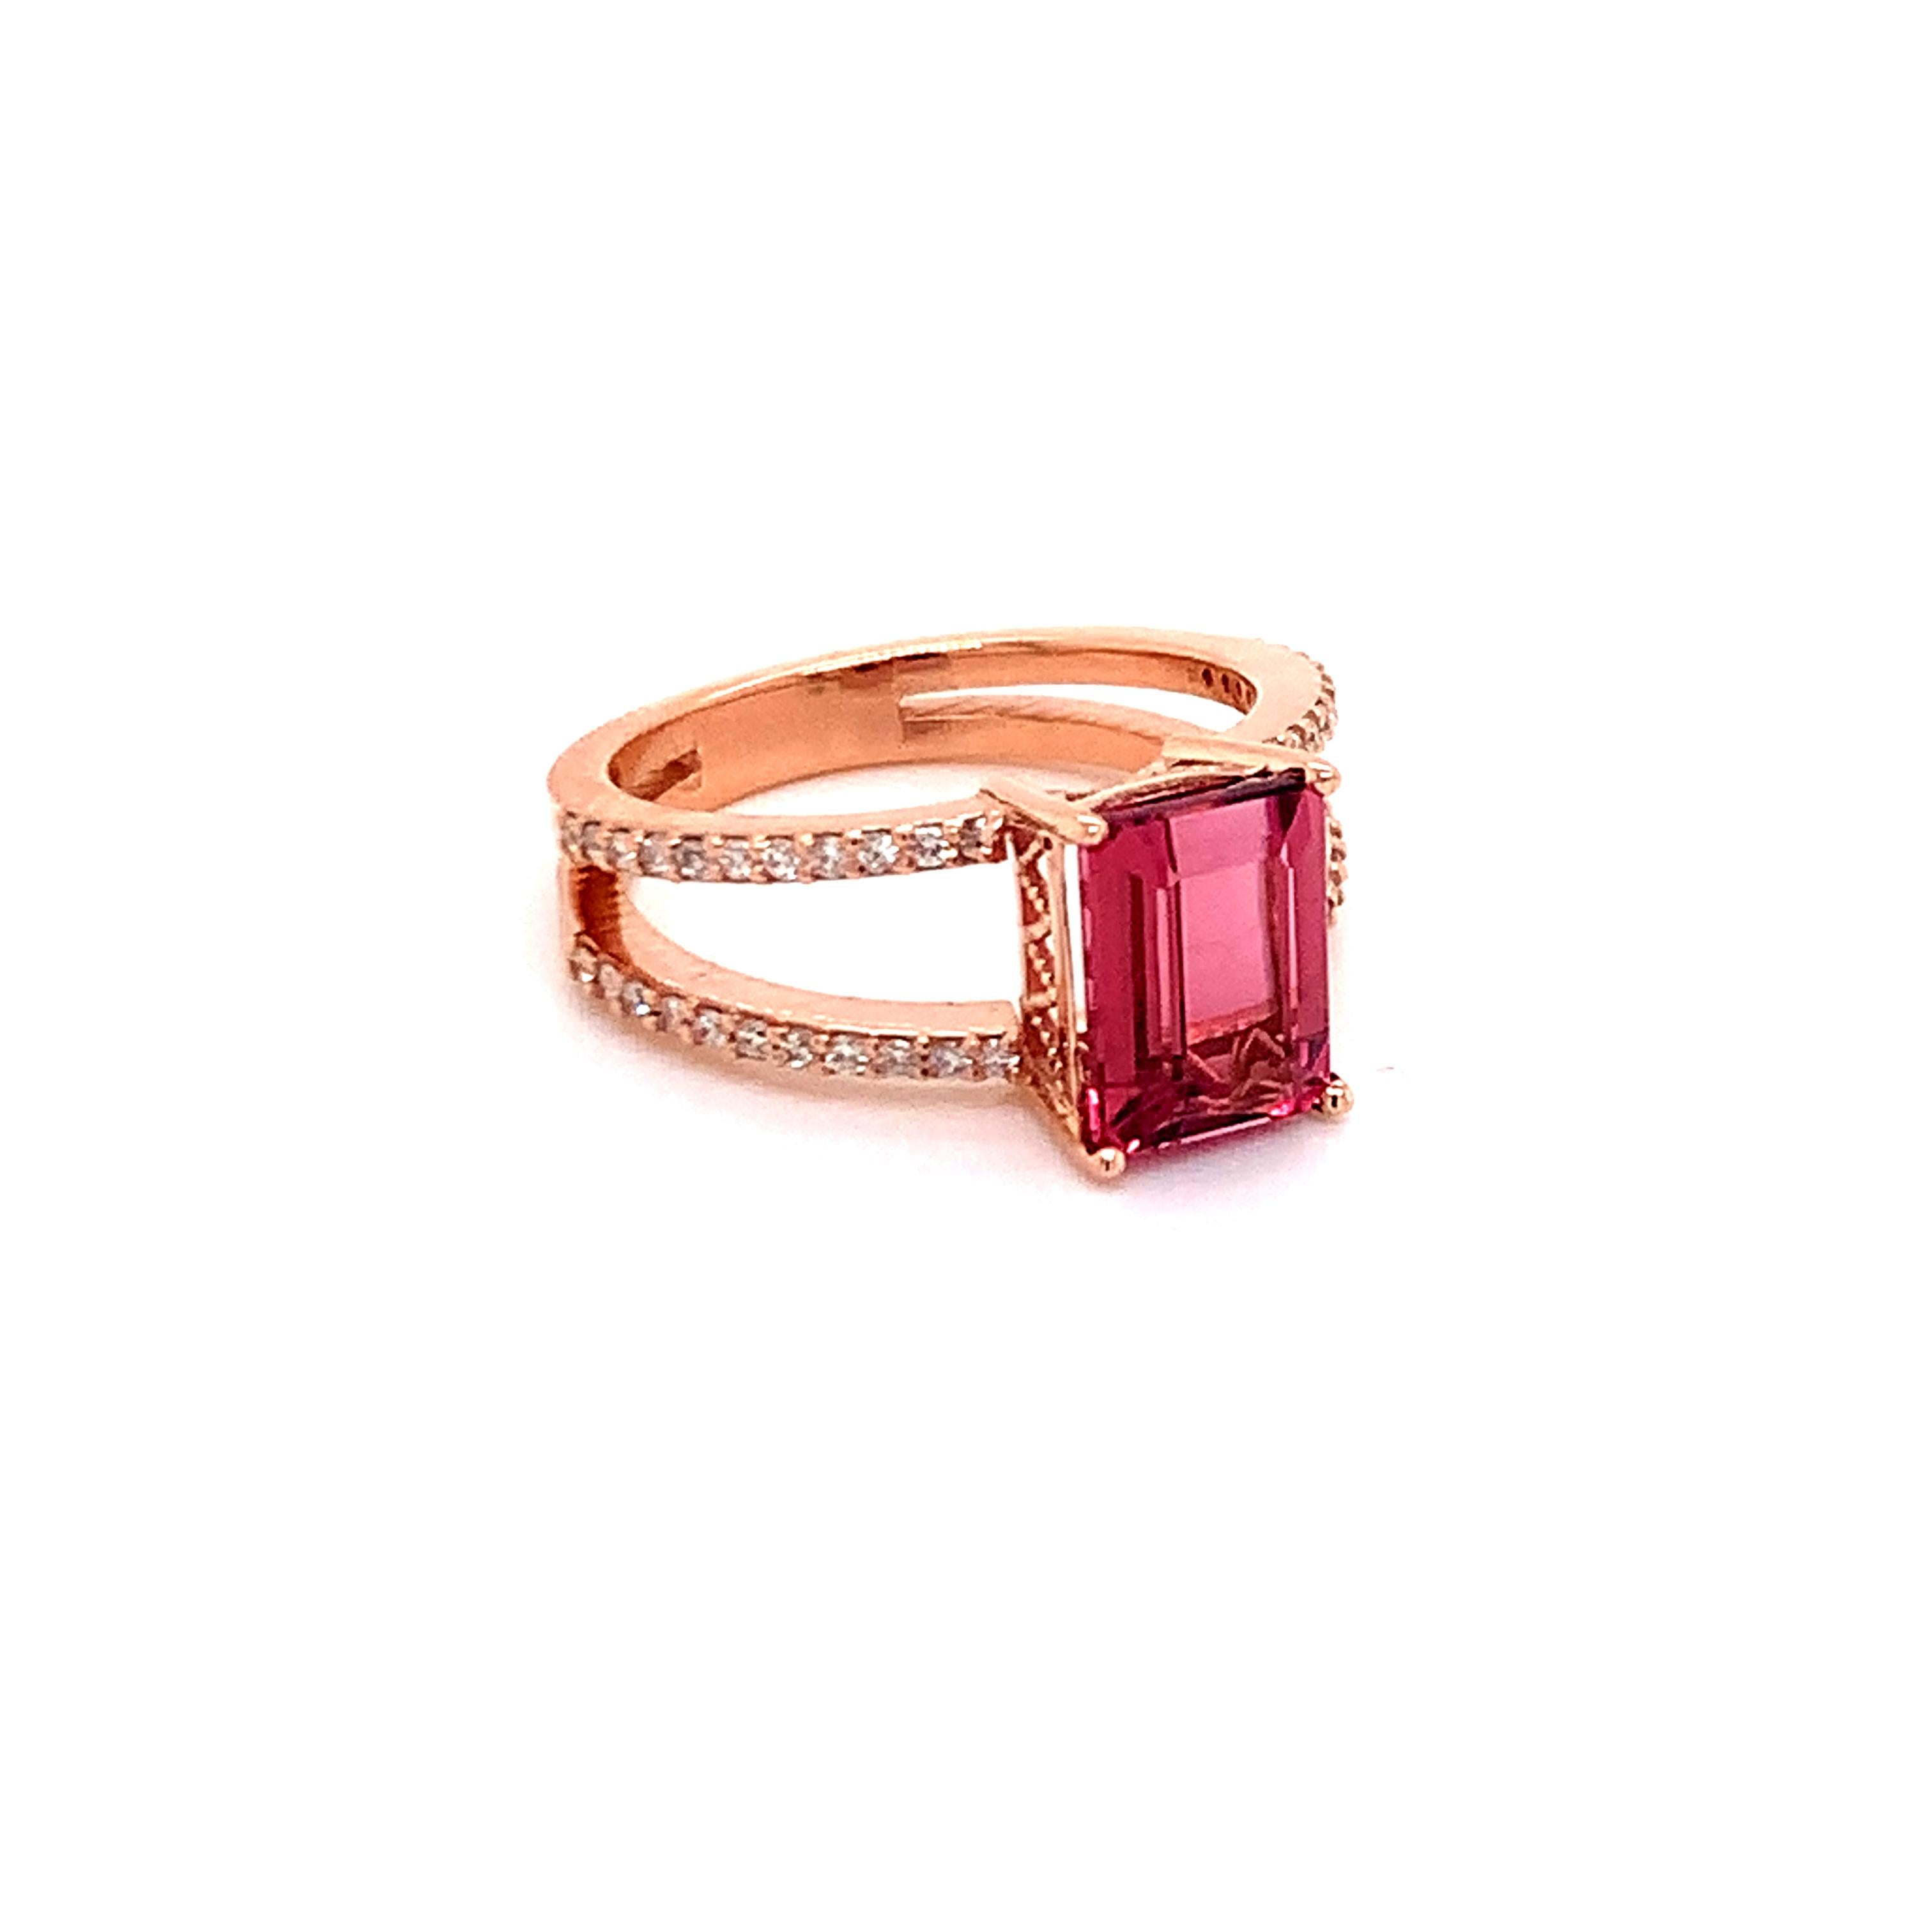 Natural Tourmaline Diamond Ring 14k Rose Gold 2.2 TCW Certified For Sale 2